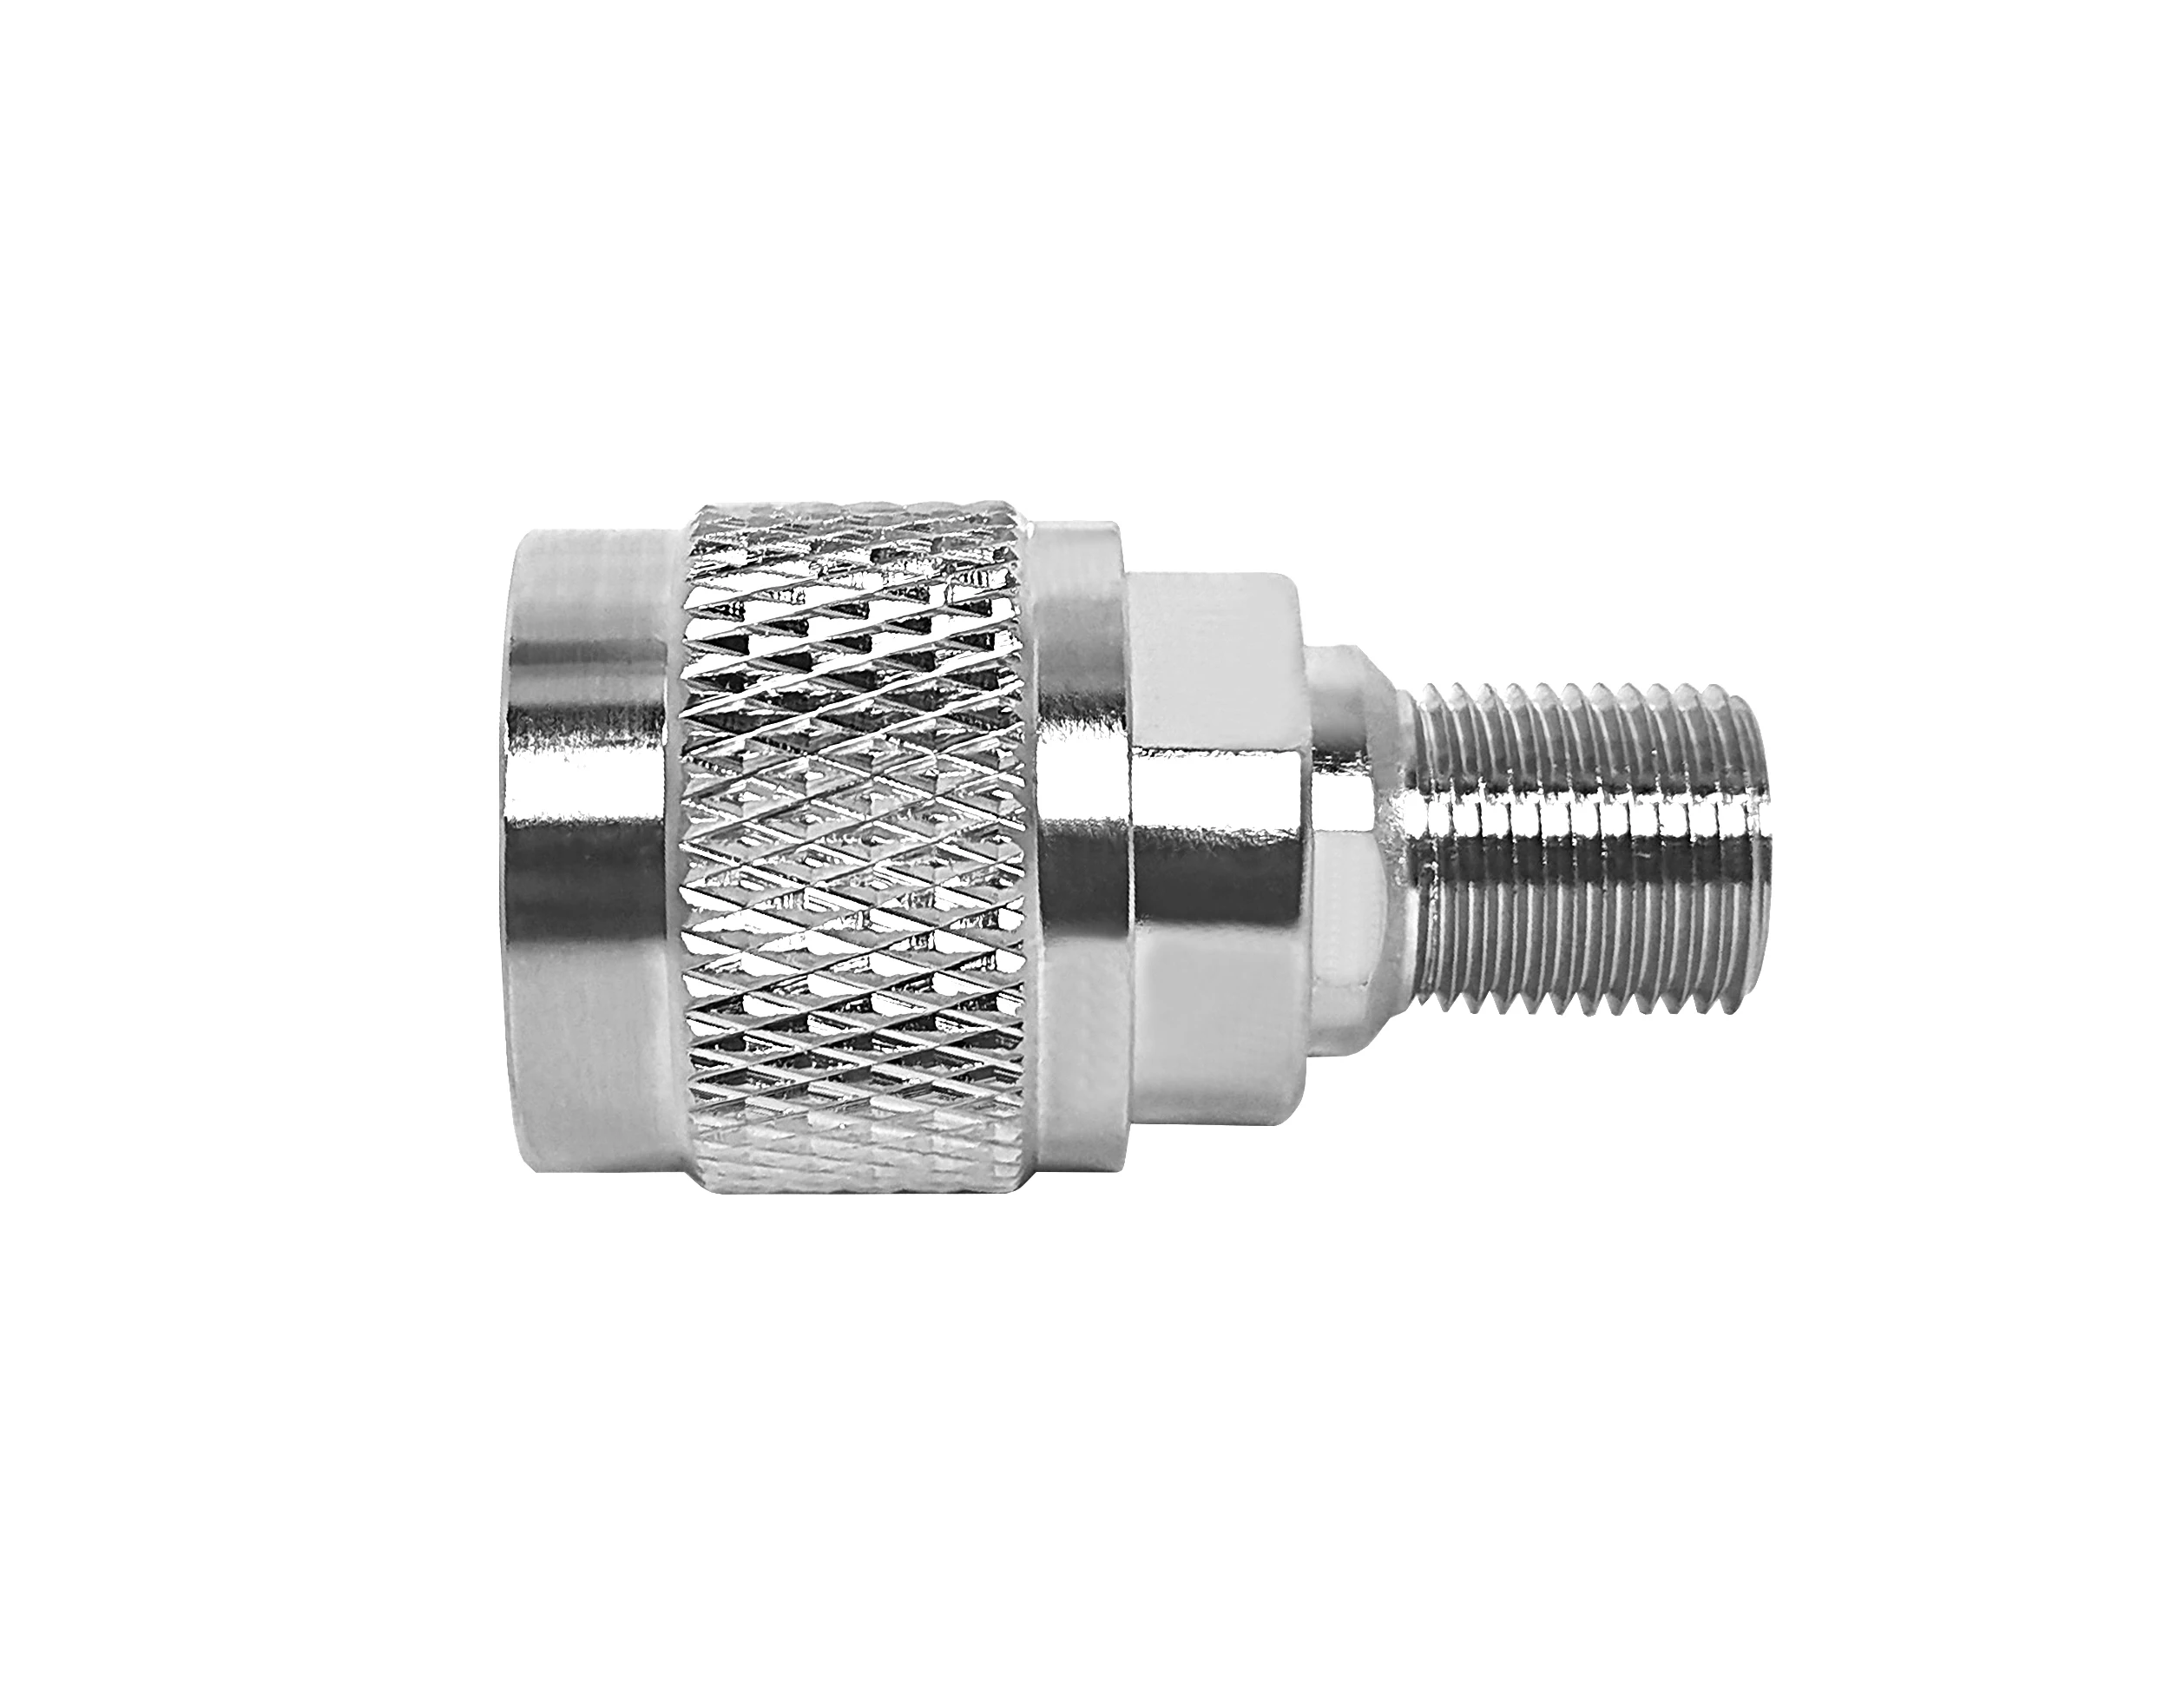 RFVOTON Adaptor n male plug to f female jack brass connector straight rf coaxial adapter factory